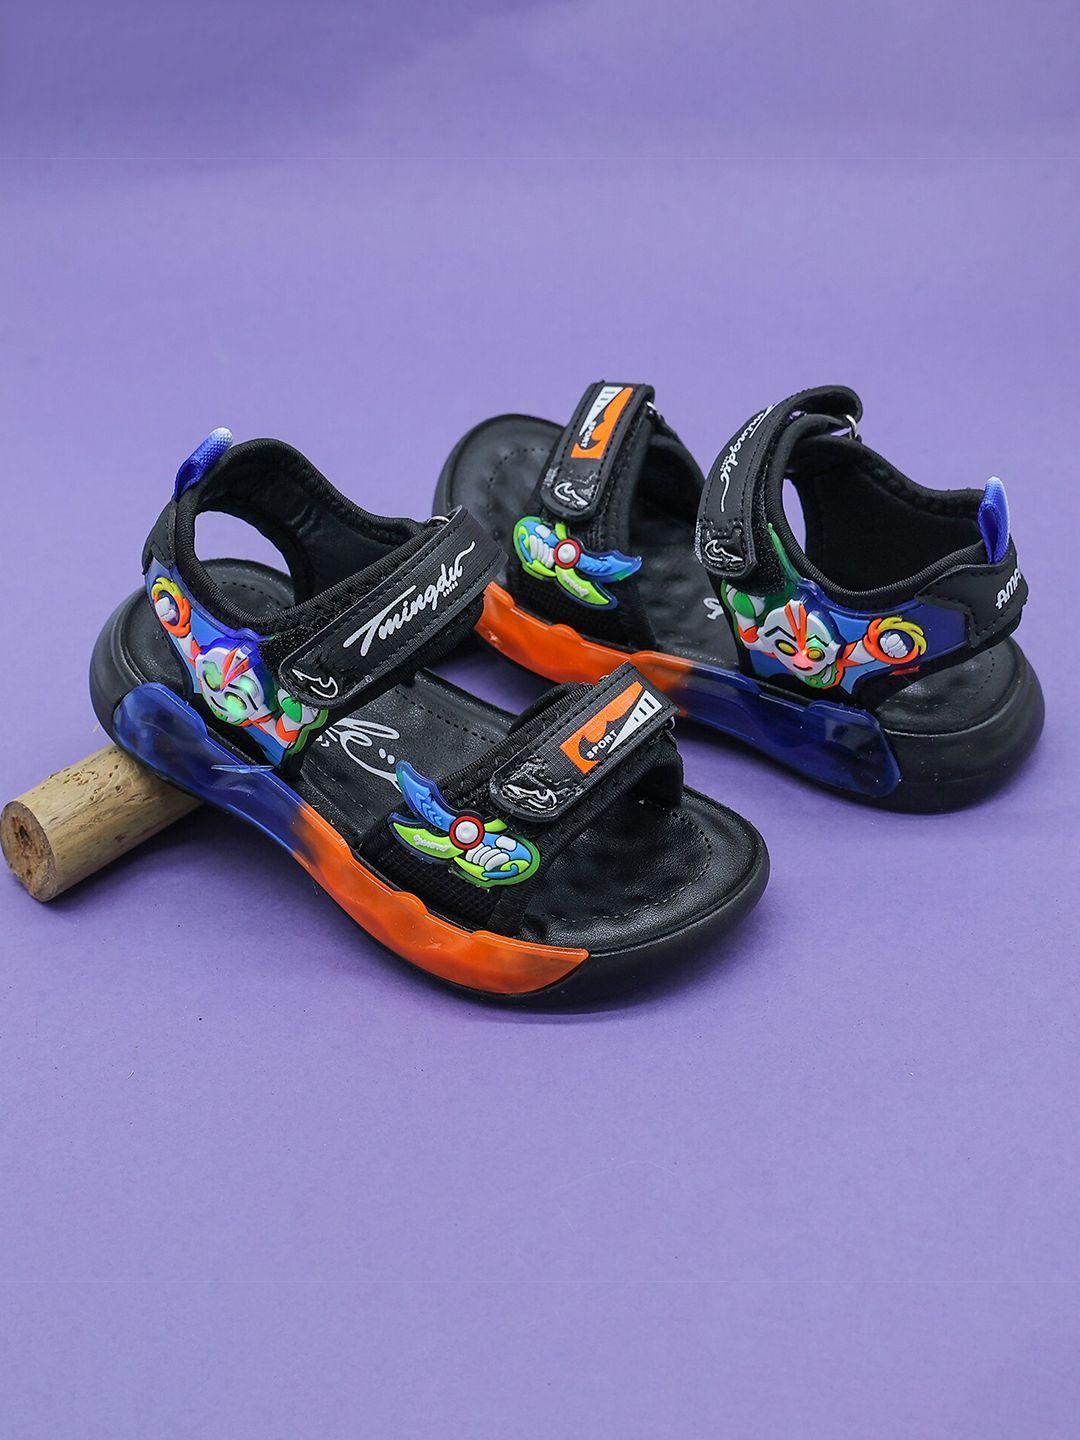 feetwell shoes boys printed velcro closure sports sandals